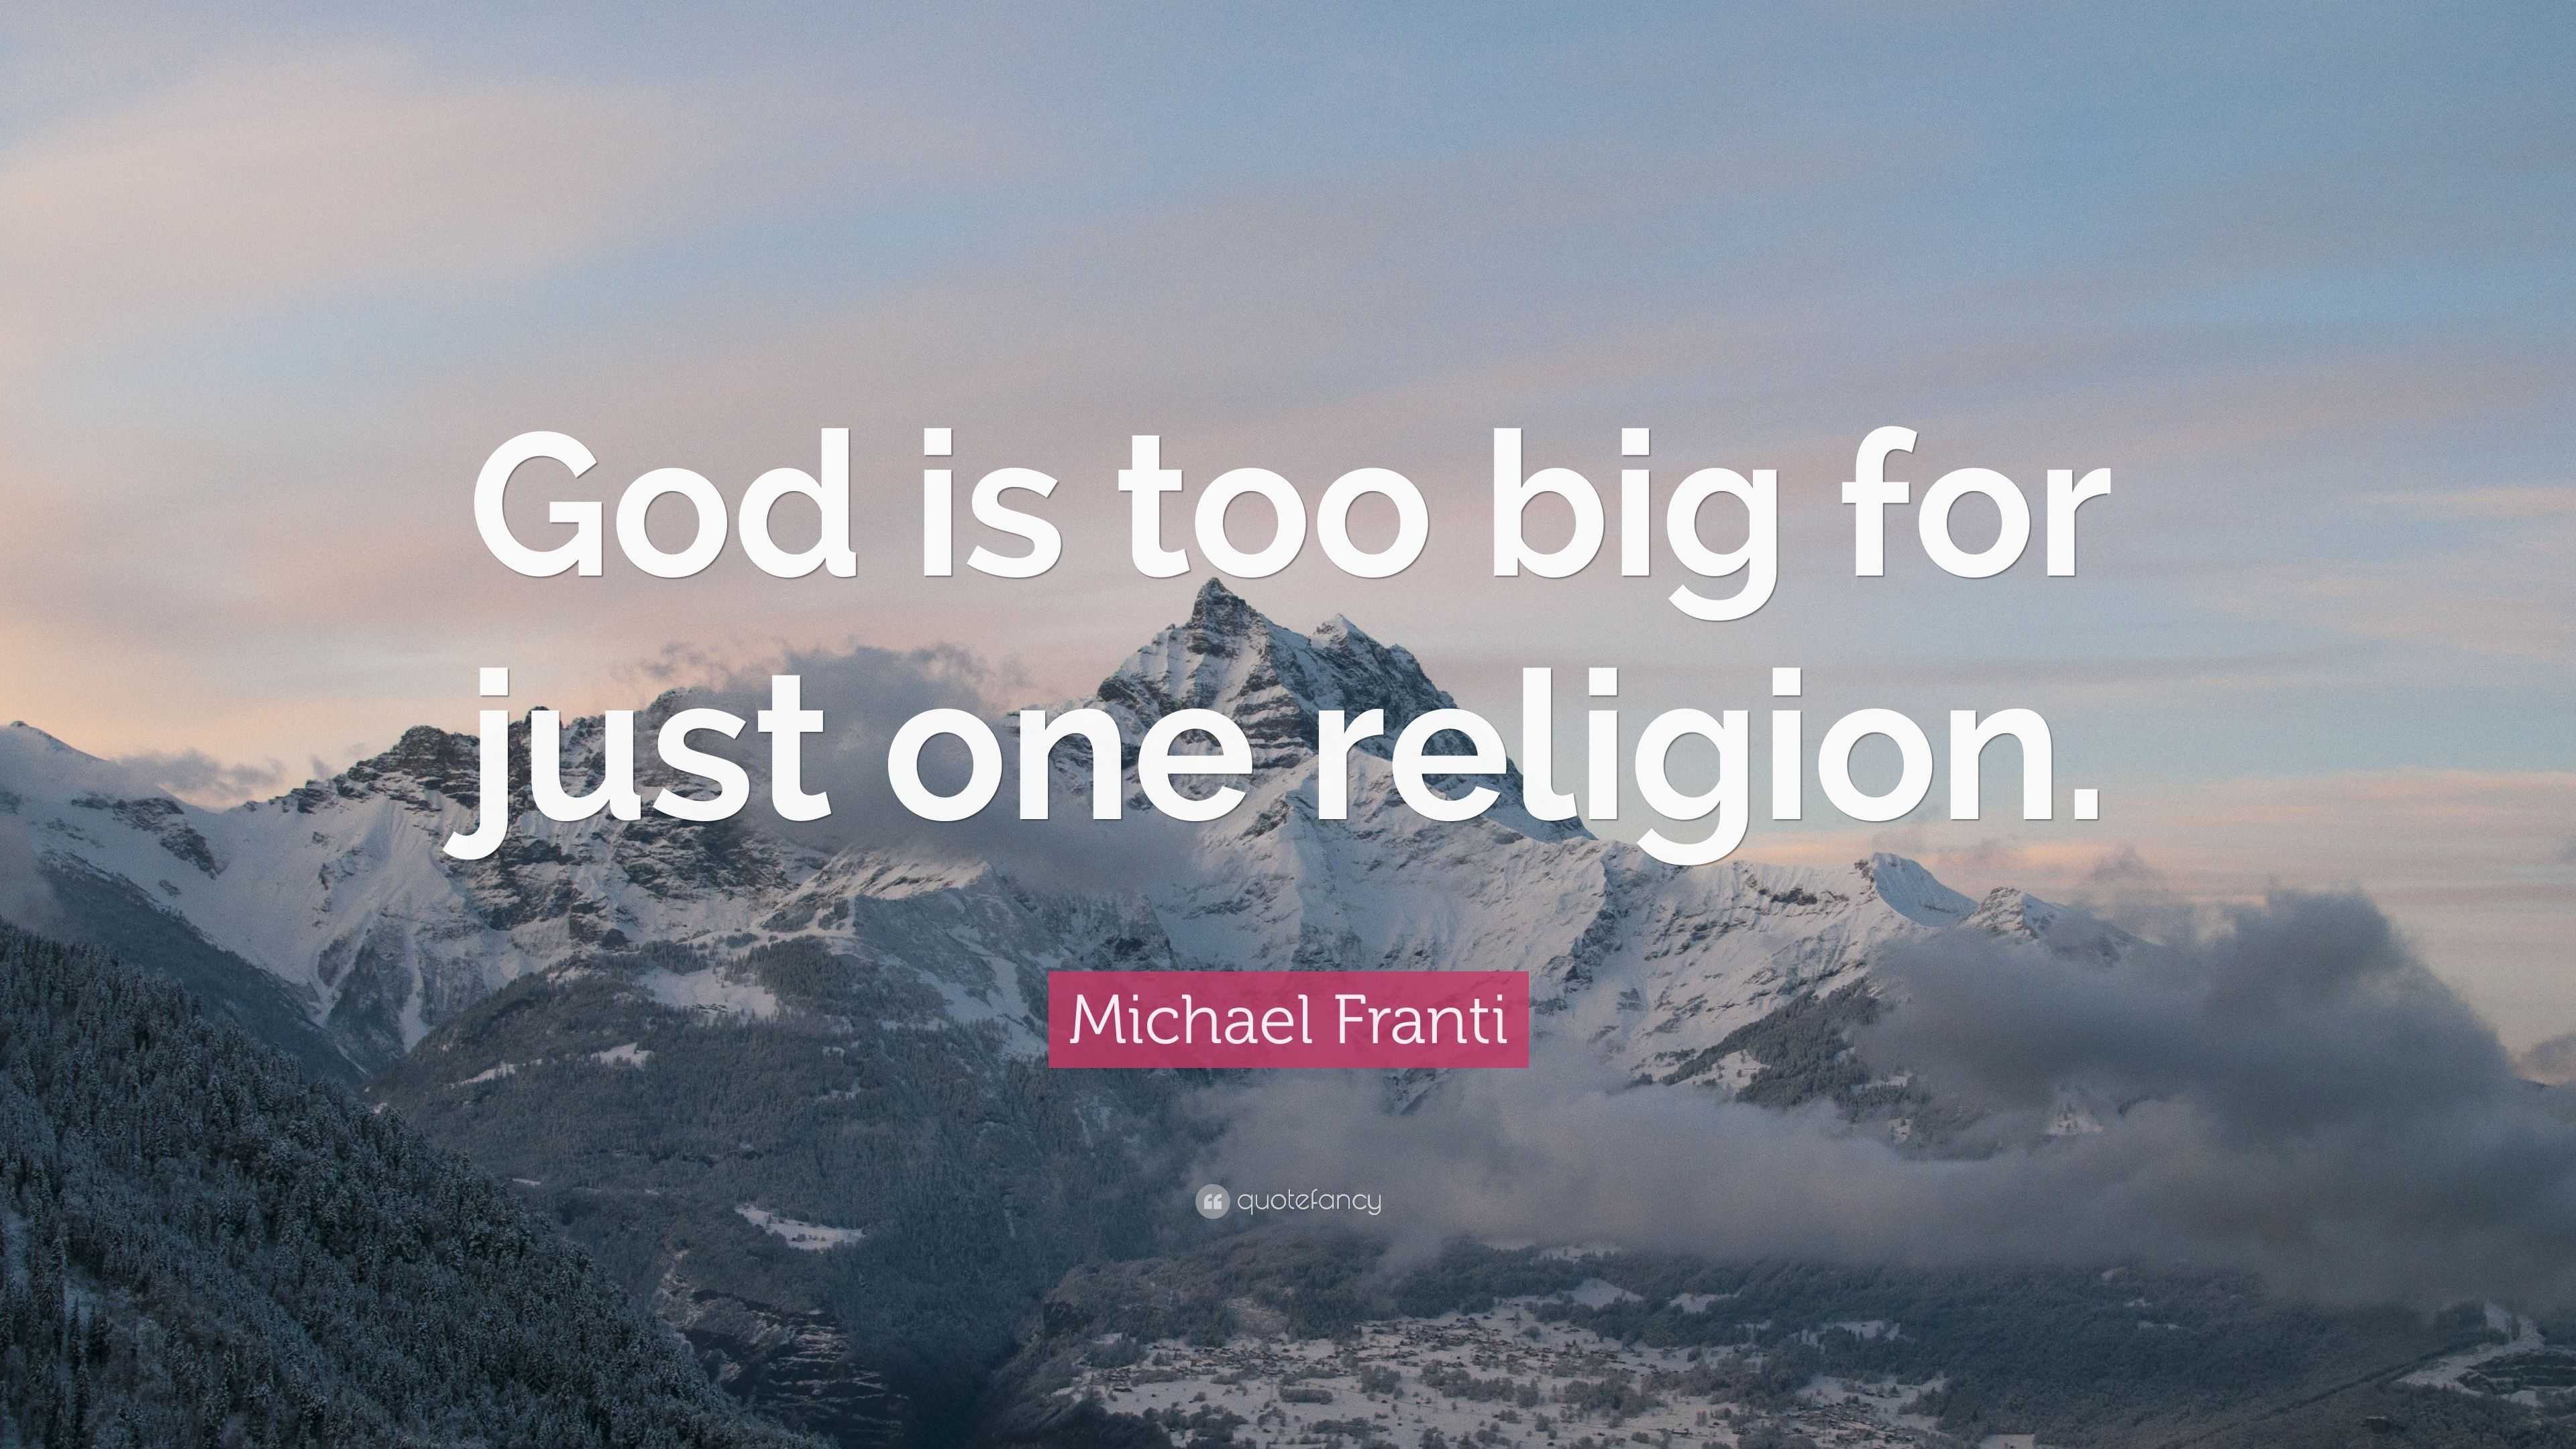 Foolish Sayings of the 'Wise': 'God is Too Big to Fit In One